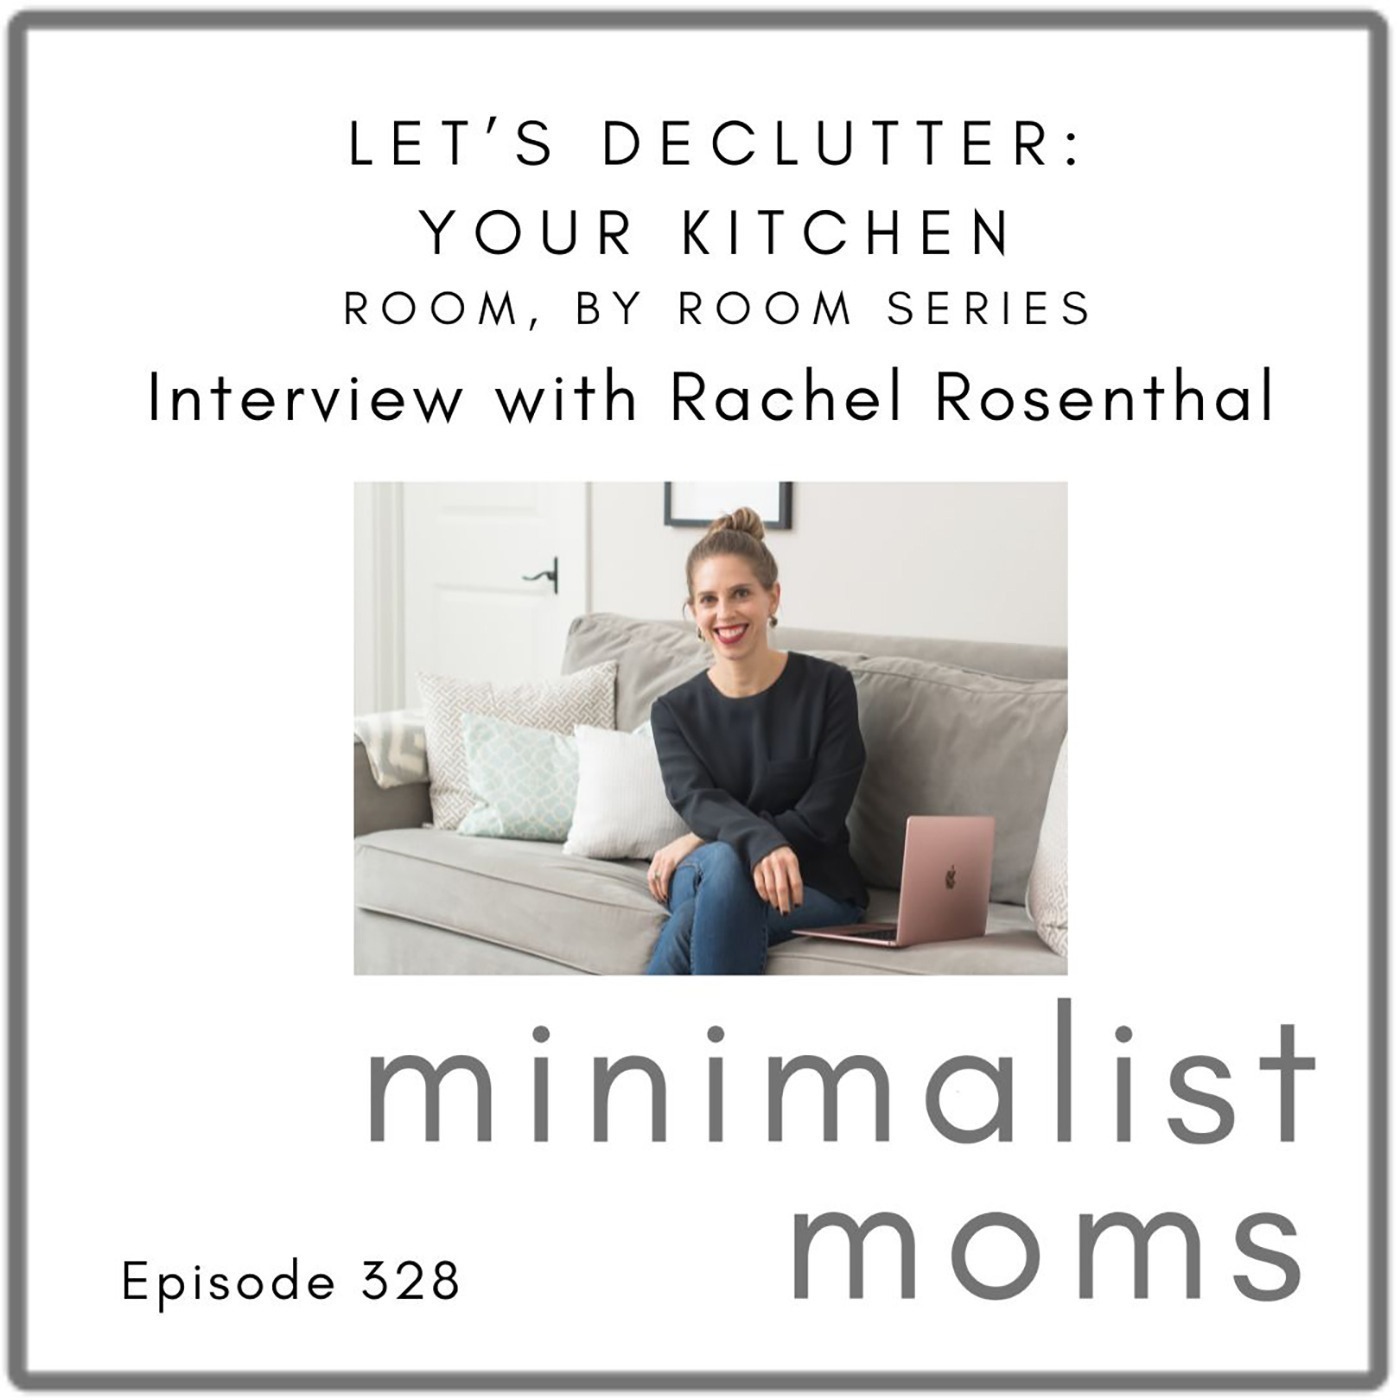 Let’s Declutter: Your Kitchen with Rachel Rosenthal (EP328) [Room by Room Series]